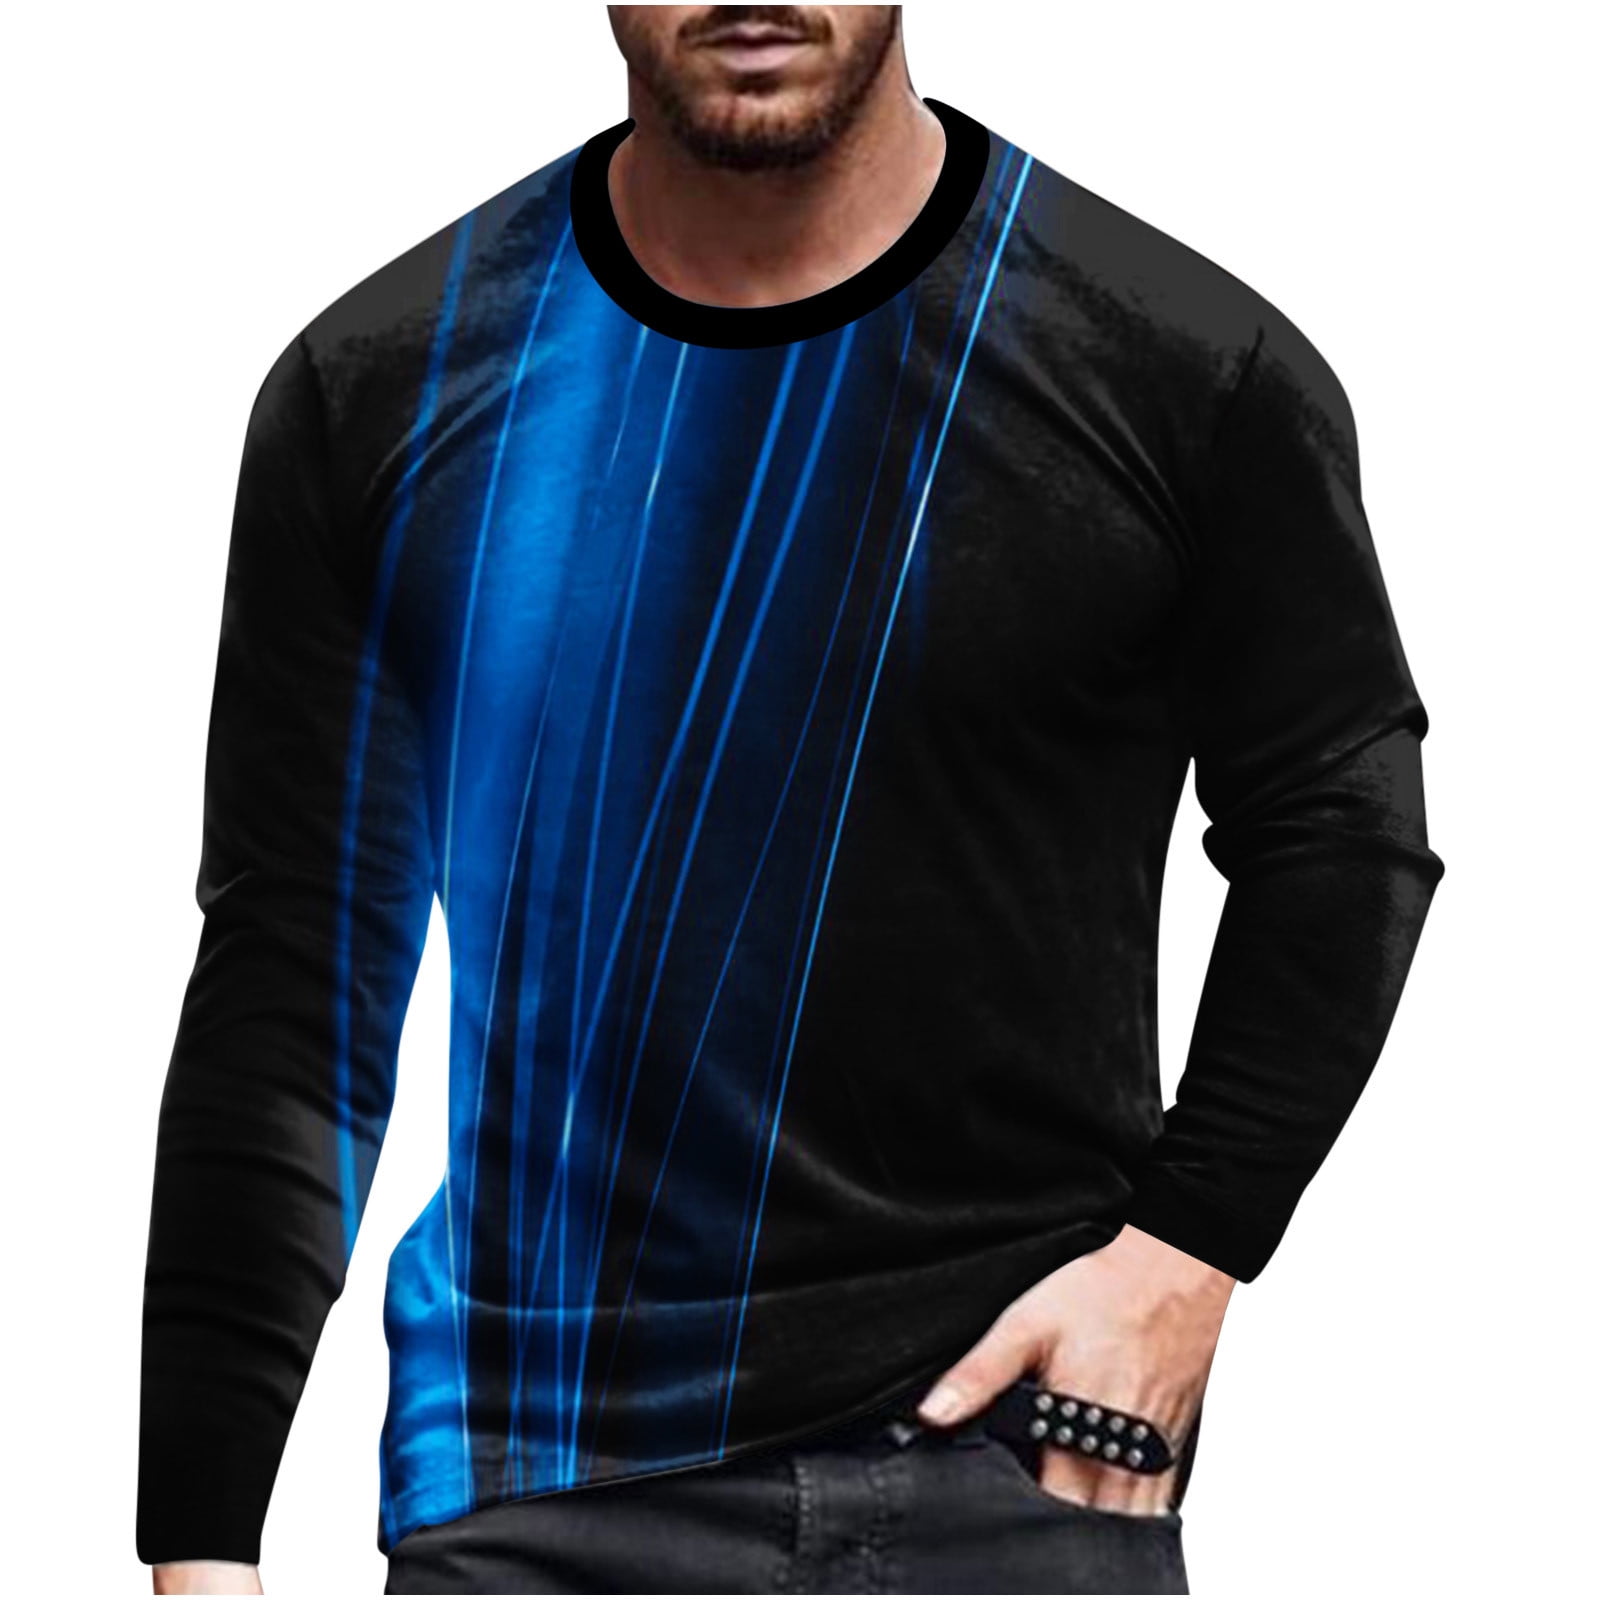 Casual YYDGH Shirt Fall Printed Mens Shirt Round Colorful 3D Tops Neck Size Sleeve Plus T Long Blouses(2#-Blue,4XL) Pullover Sports